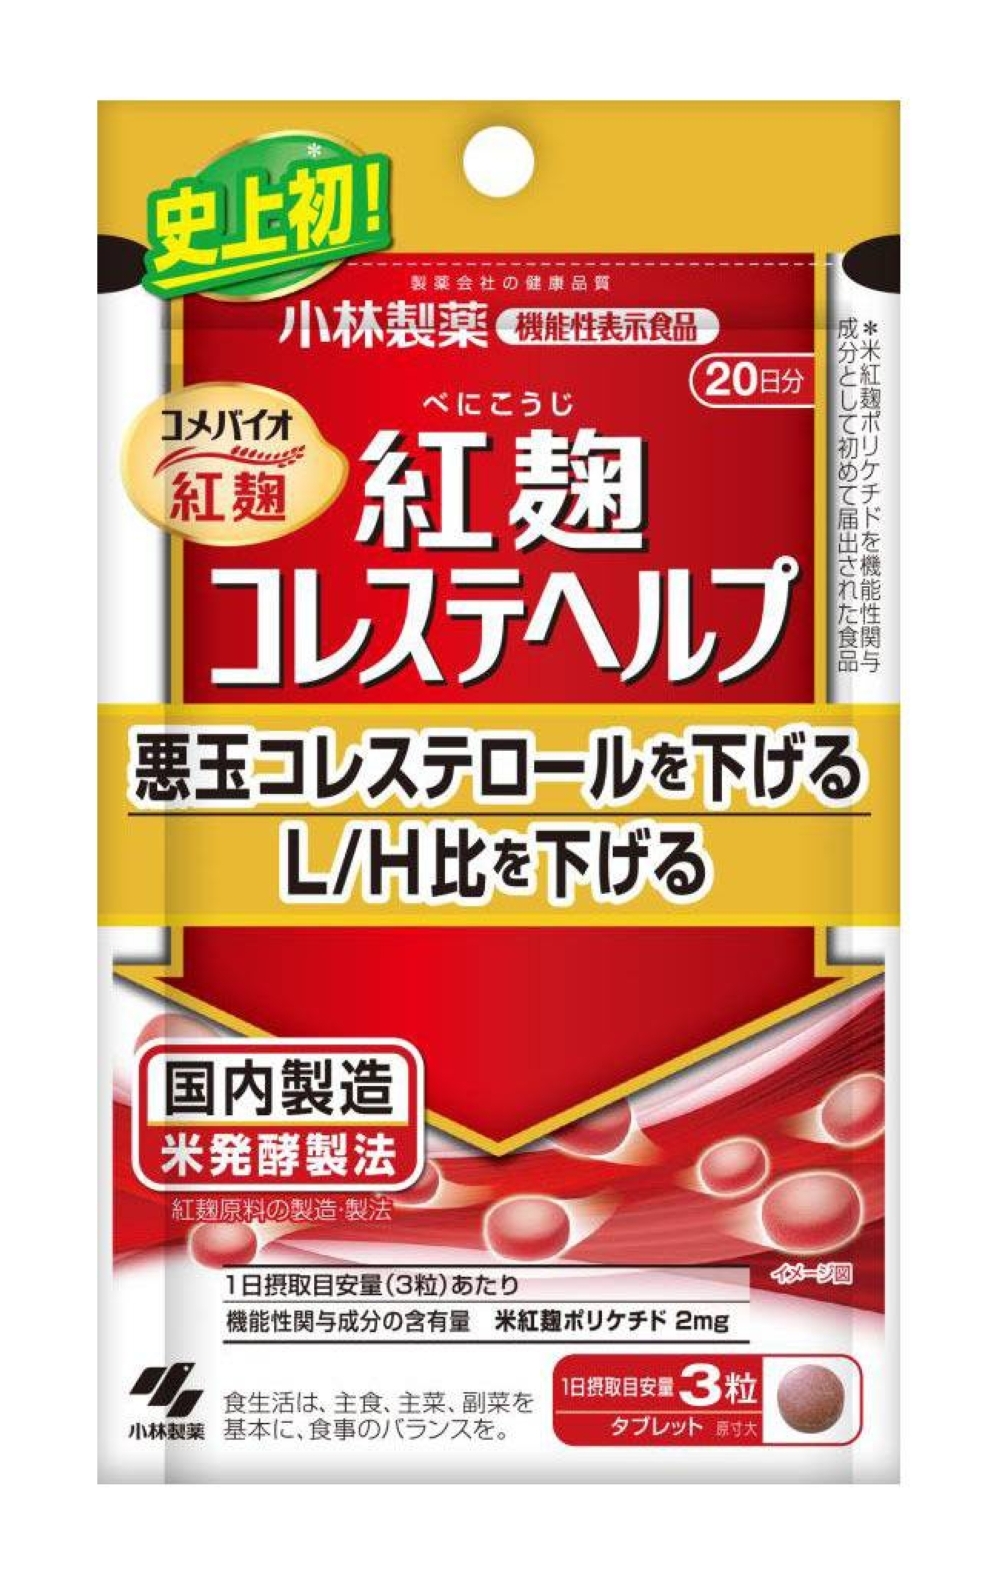 Kobayashi Pharmaceutical is voluntarily recalling five products, including about 300,000 packages of Beni Koji Choleste Help